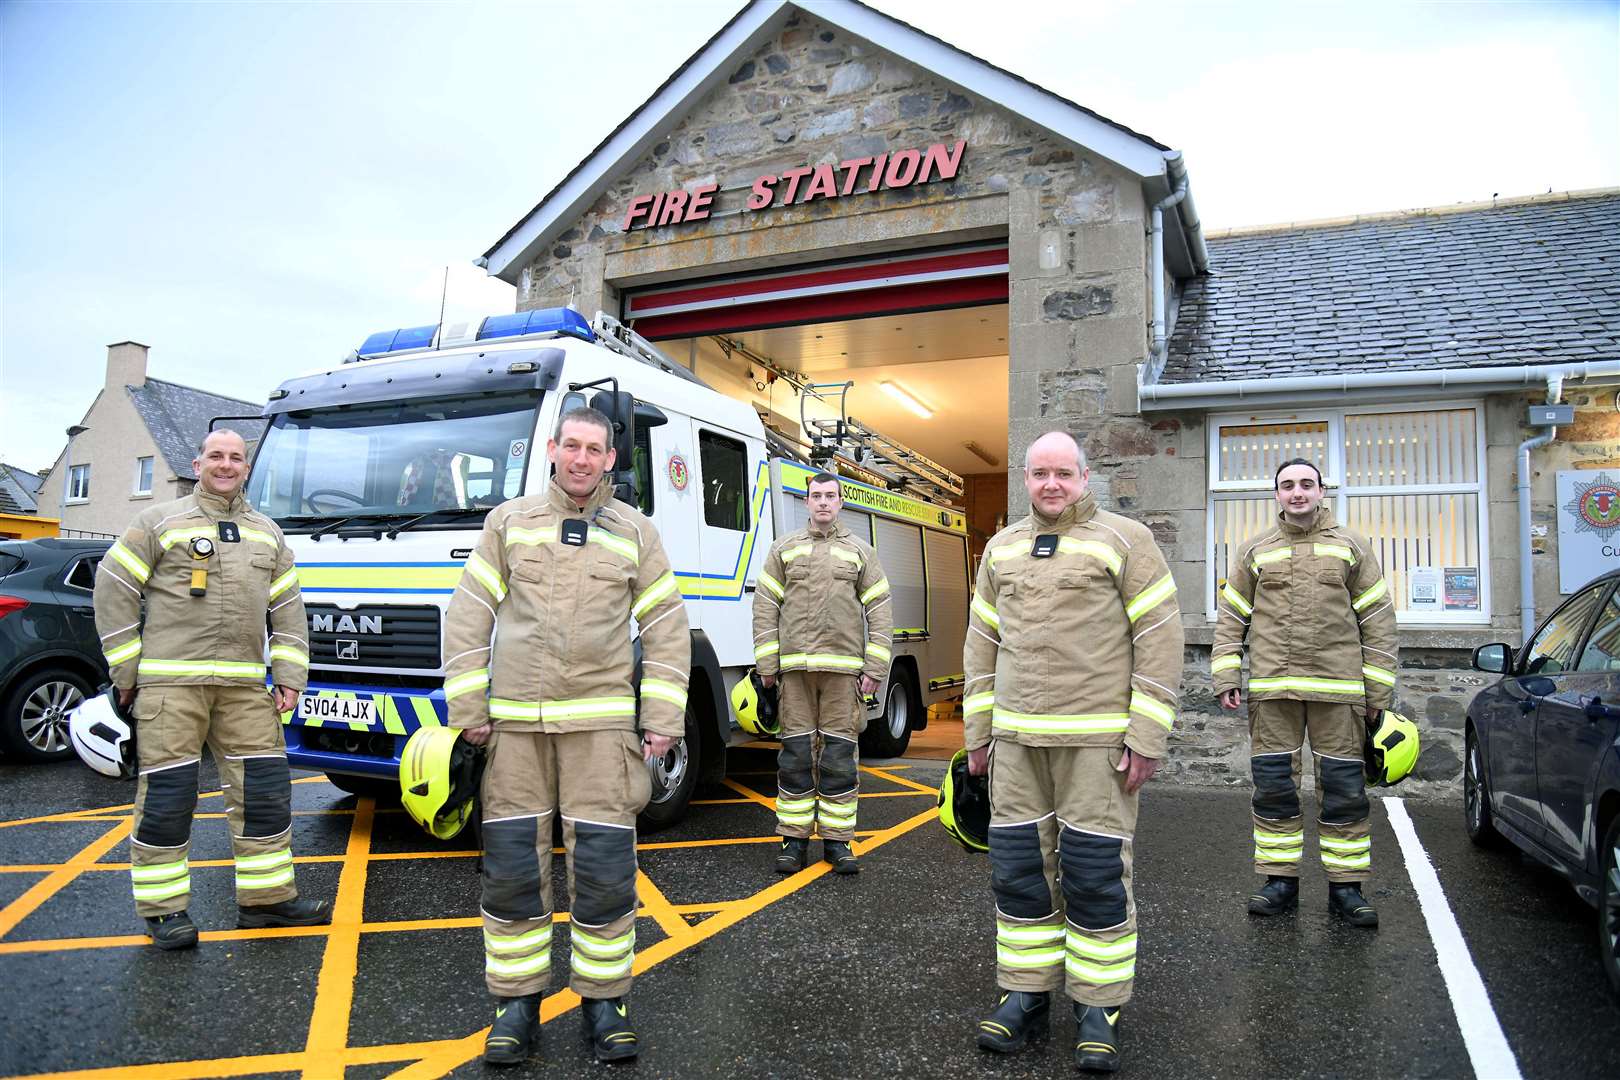 The retained team at Cullen fire station are ready to get their annual charity collection under way.